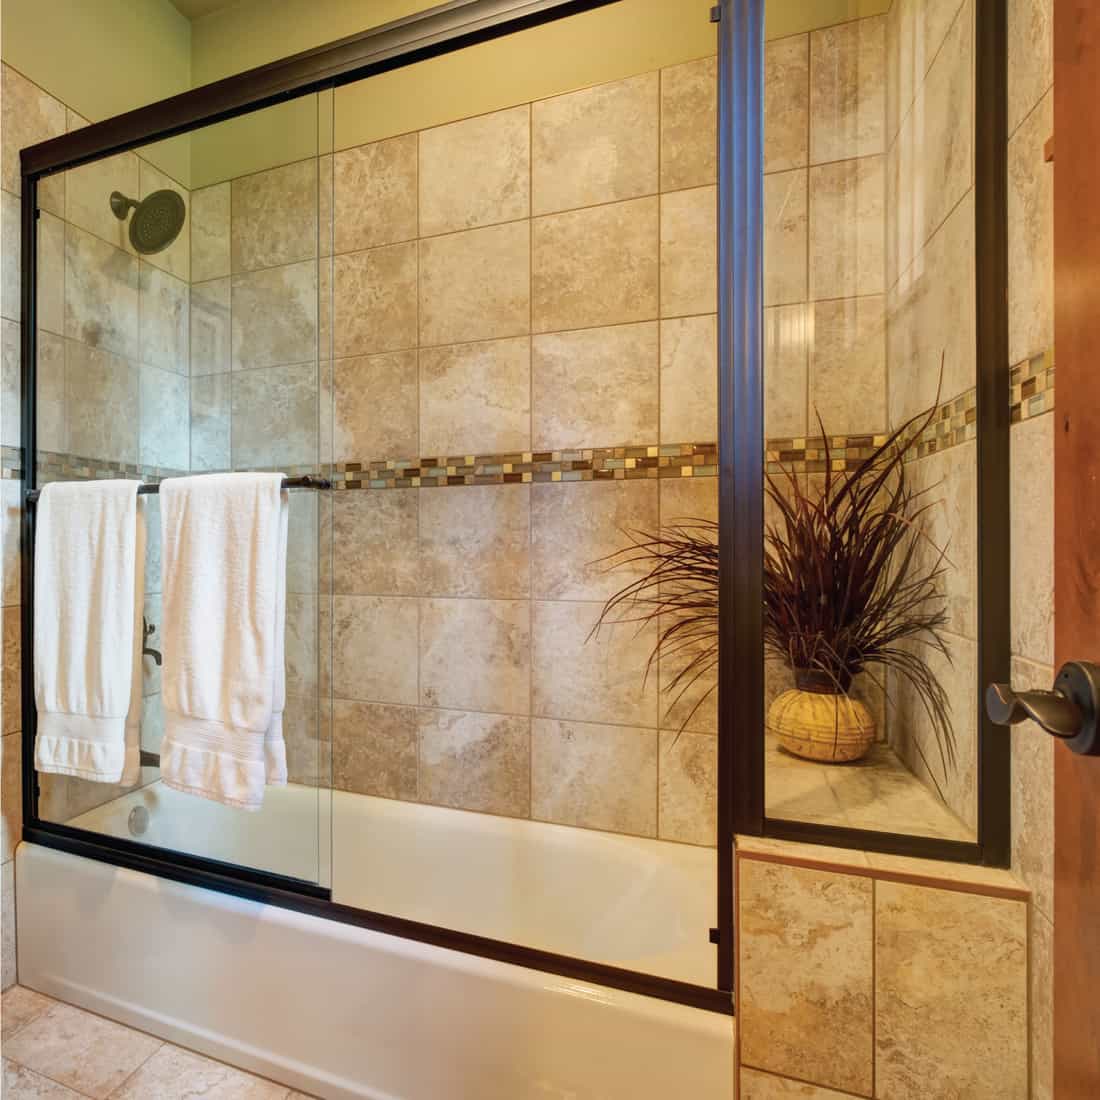 Master bathroom interior with close up of glass shower